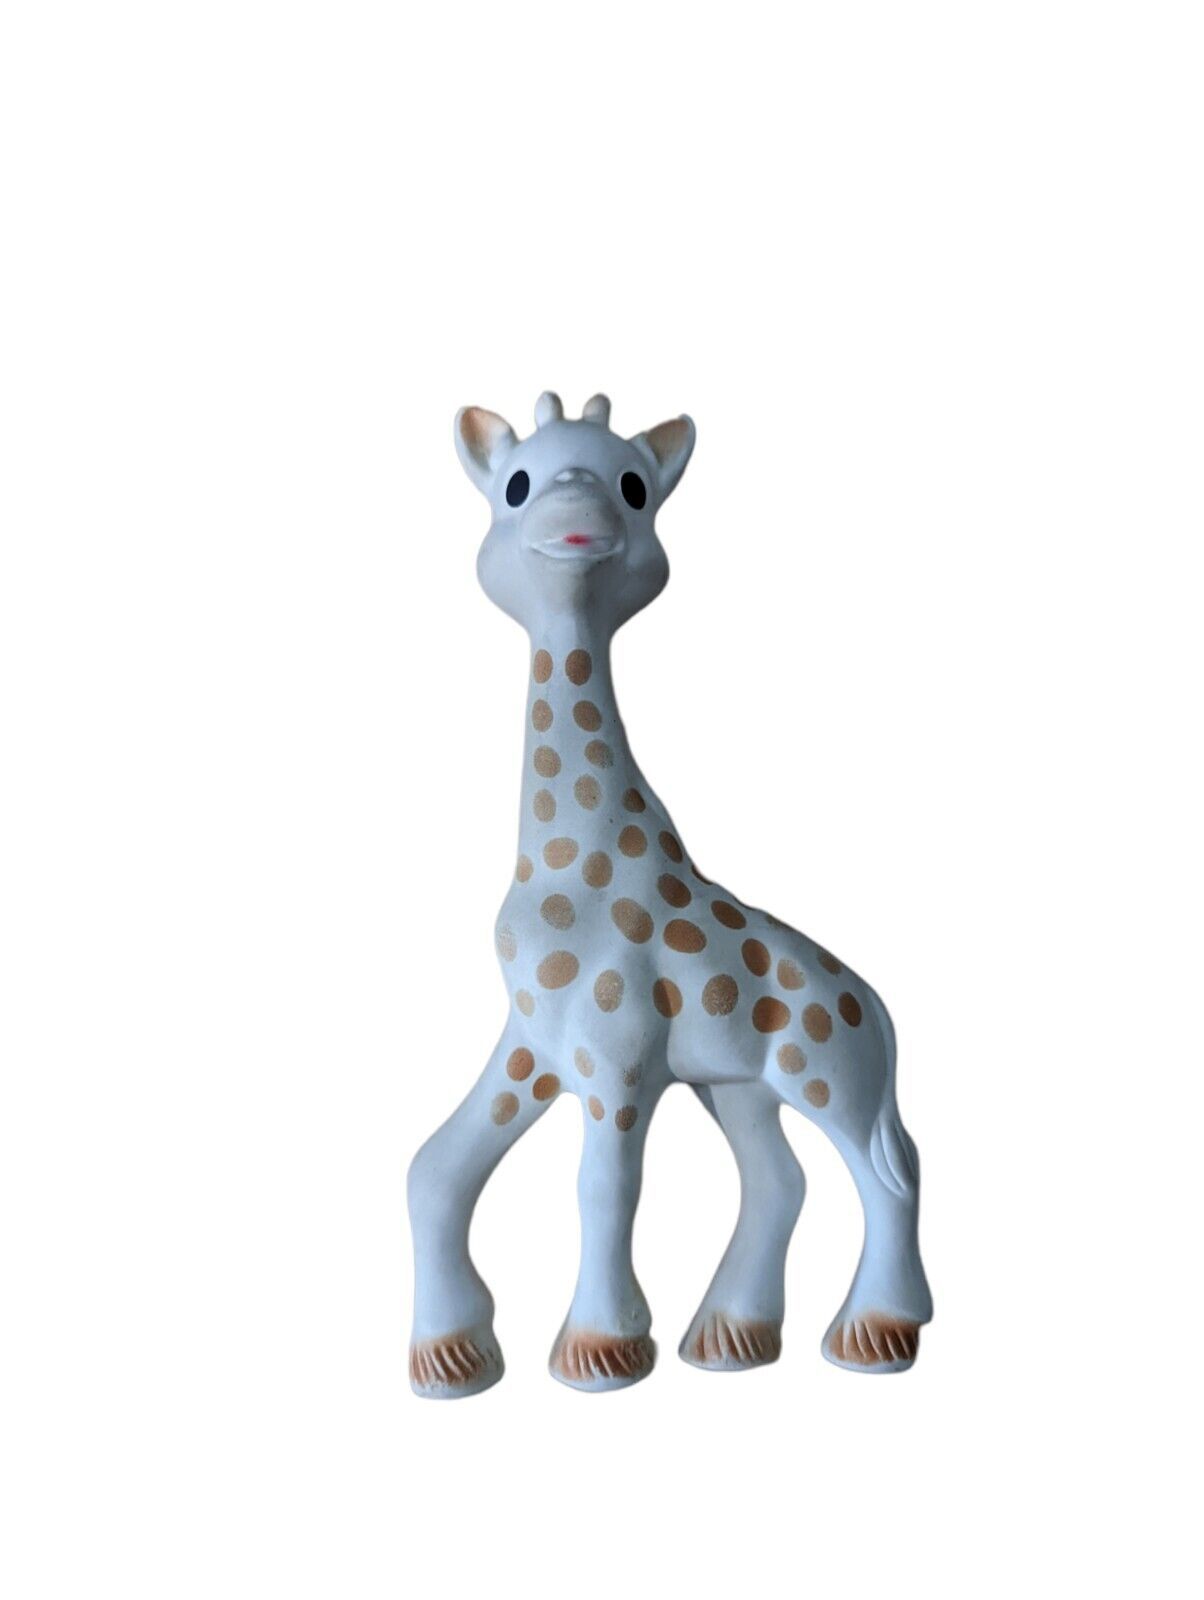 Vulli Sophie The Giraffe La Baby Natural Rubber Teether Squeaker Toy #337120 - $9.41